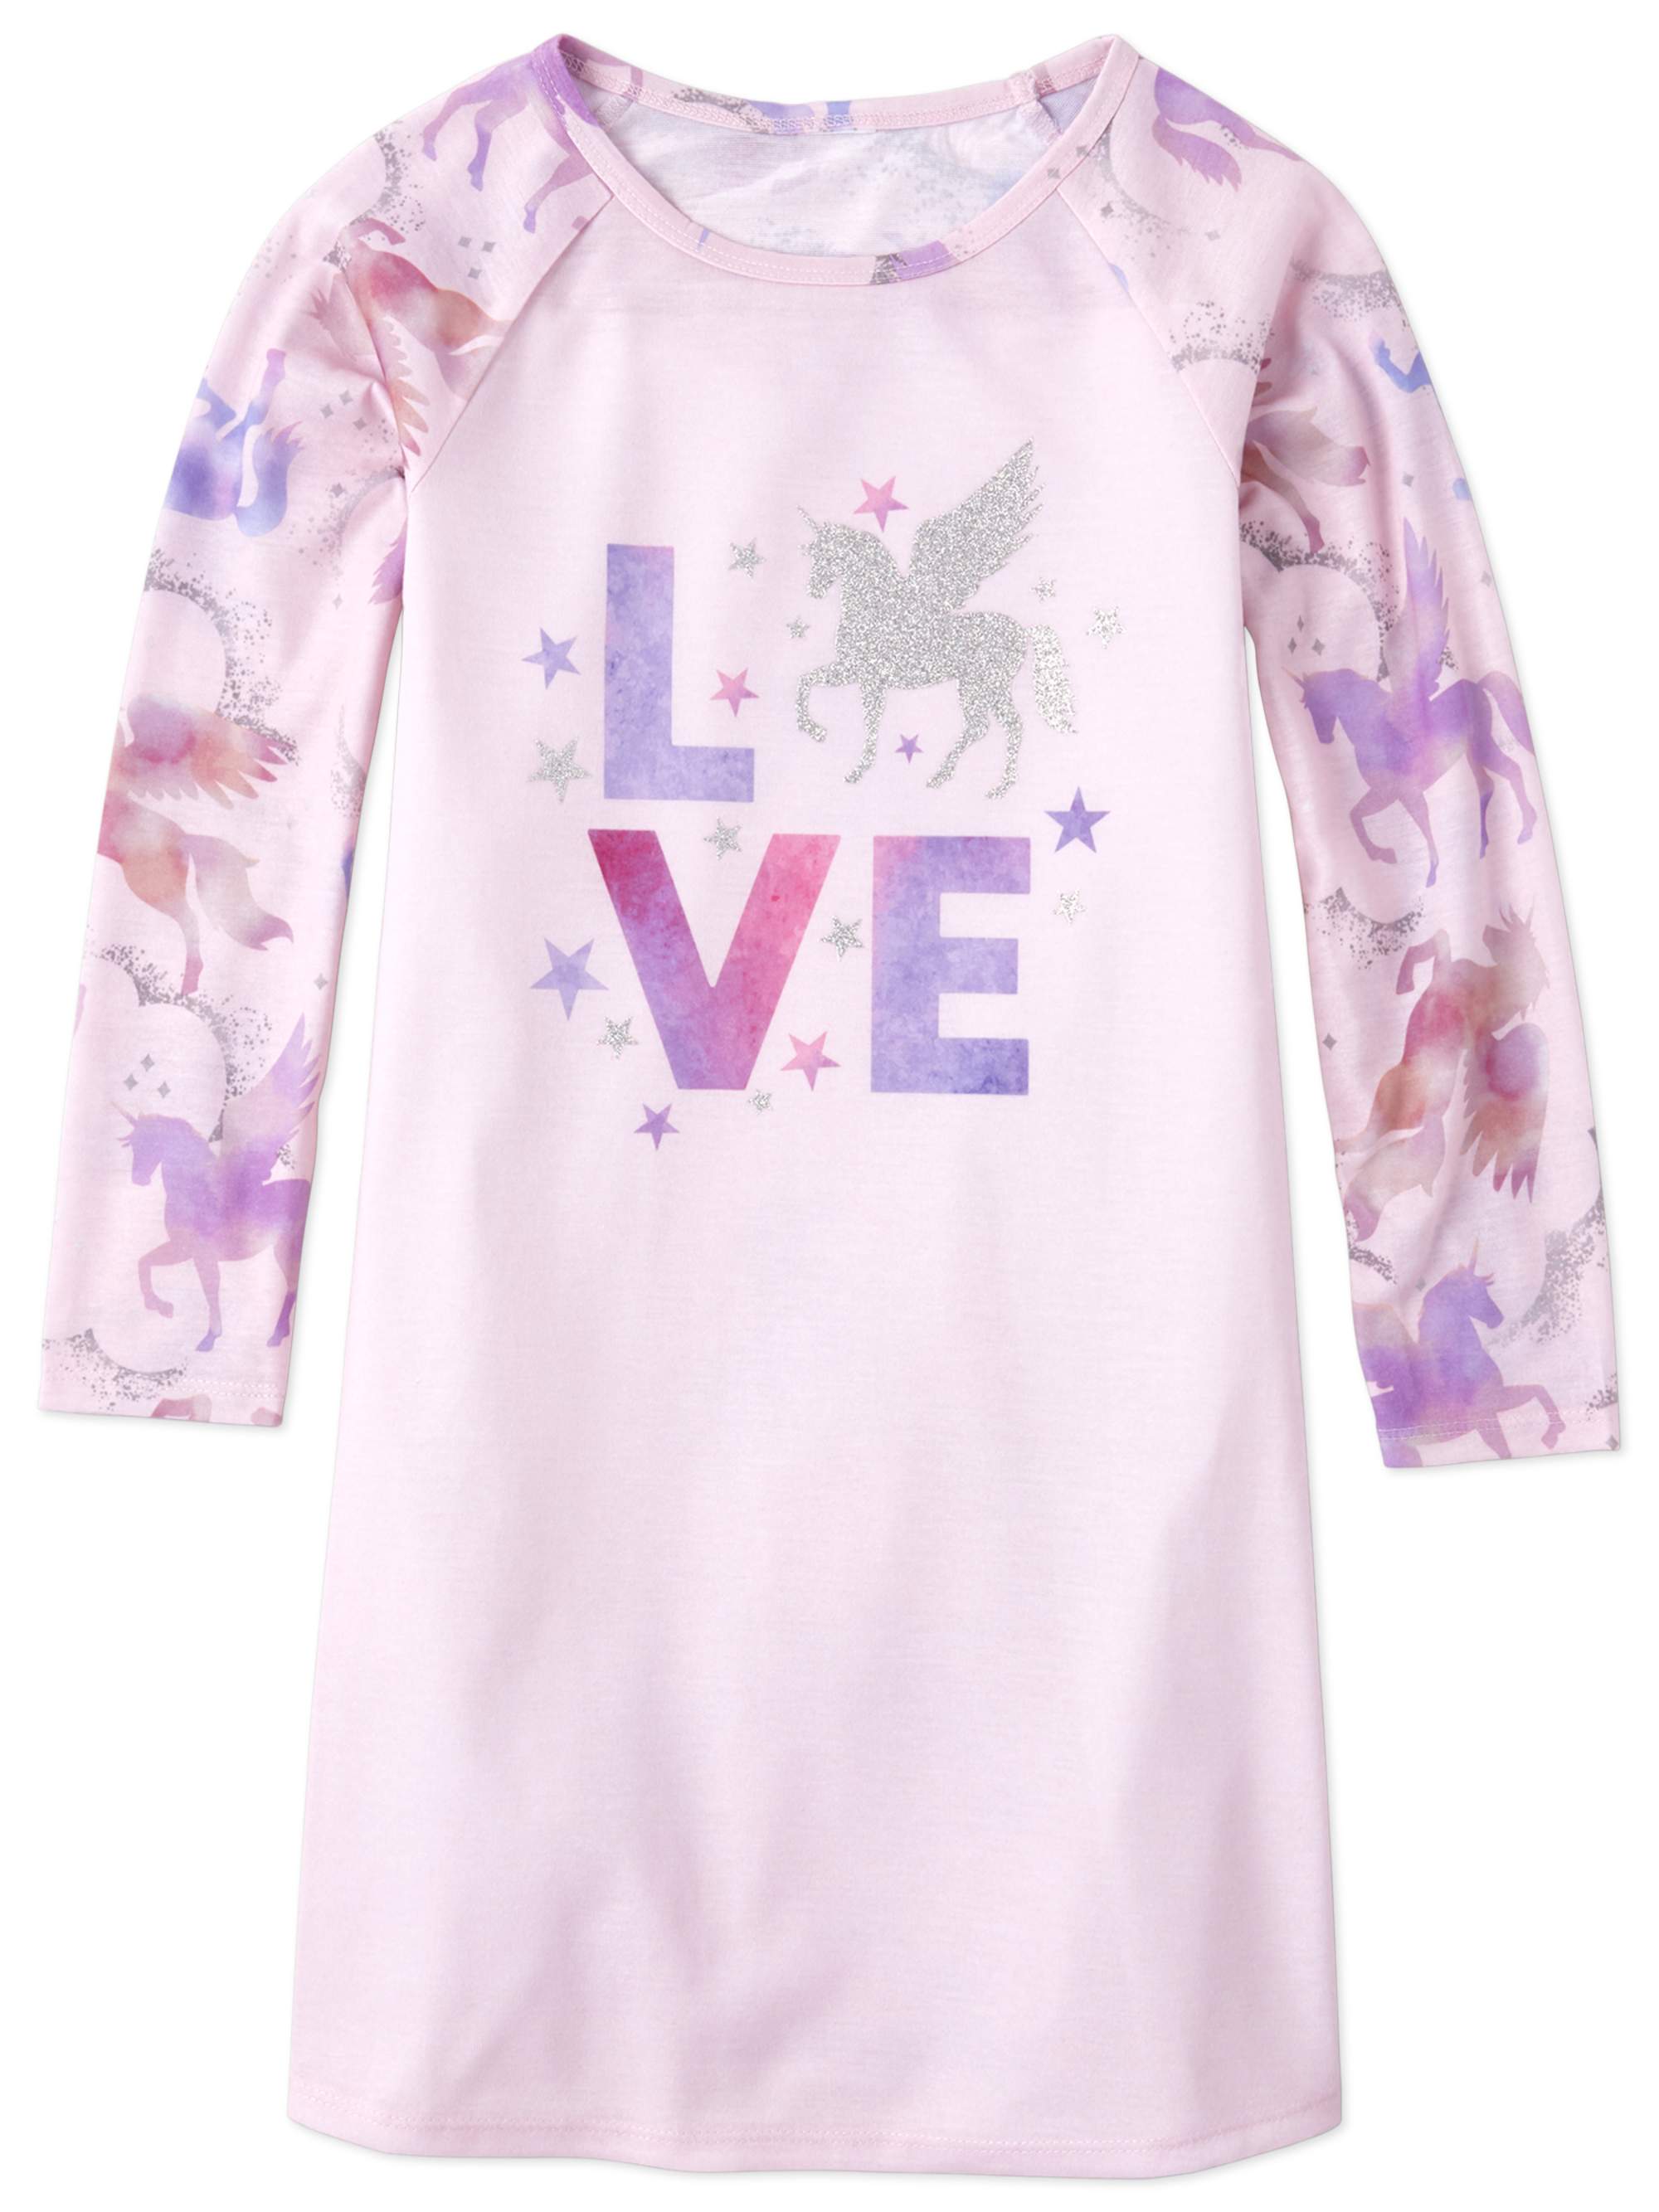 The Childrens Place Girls 'Love' Long Sleeve Unicorn Graphic Pajama Nightgown Sizes 4-16 - image 1 of 1